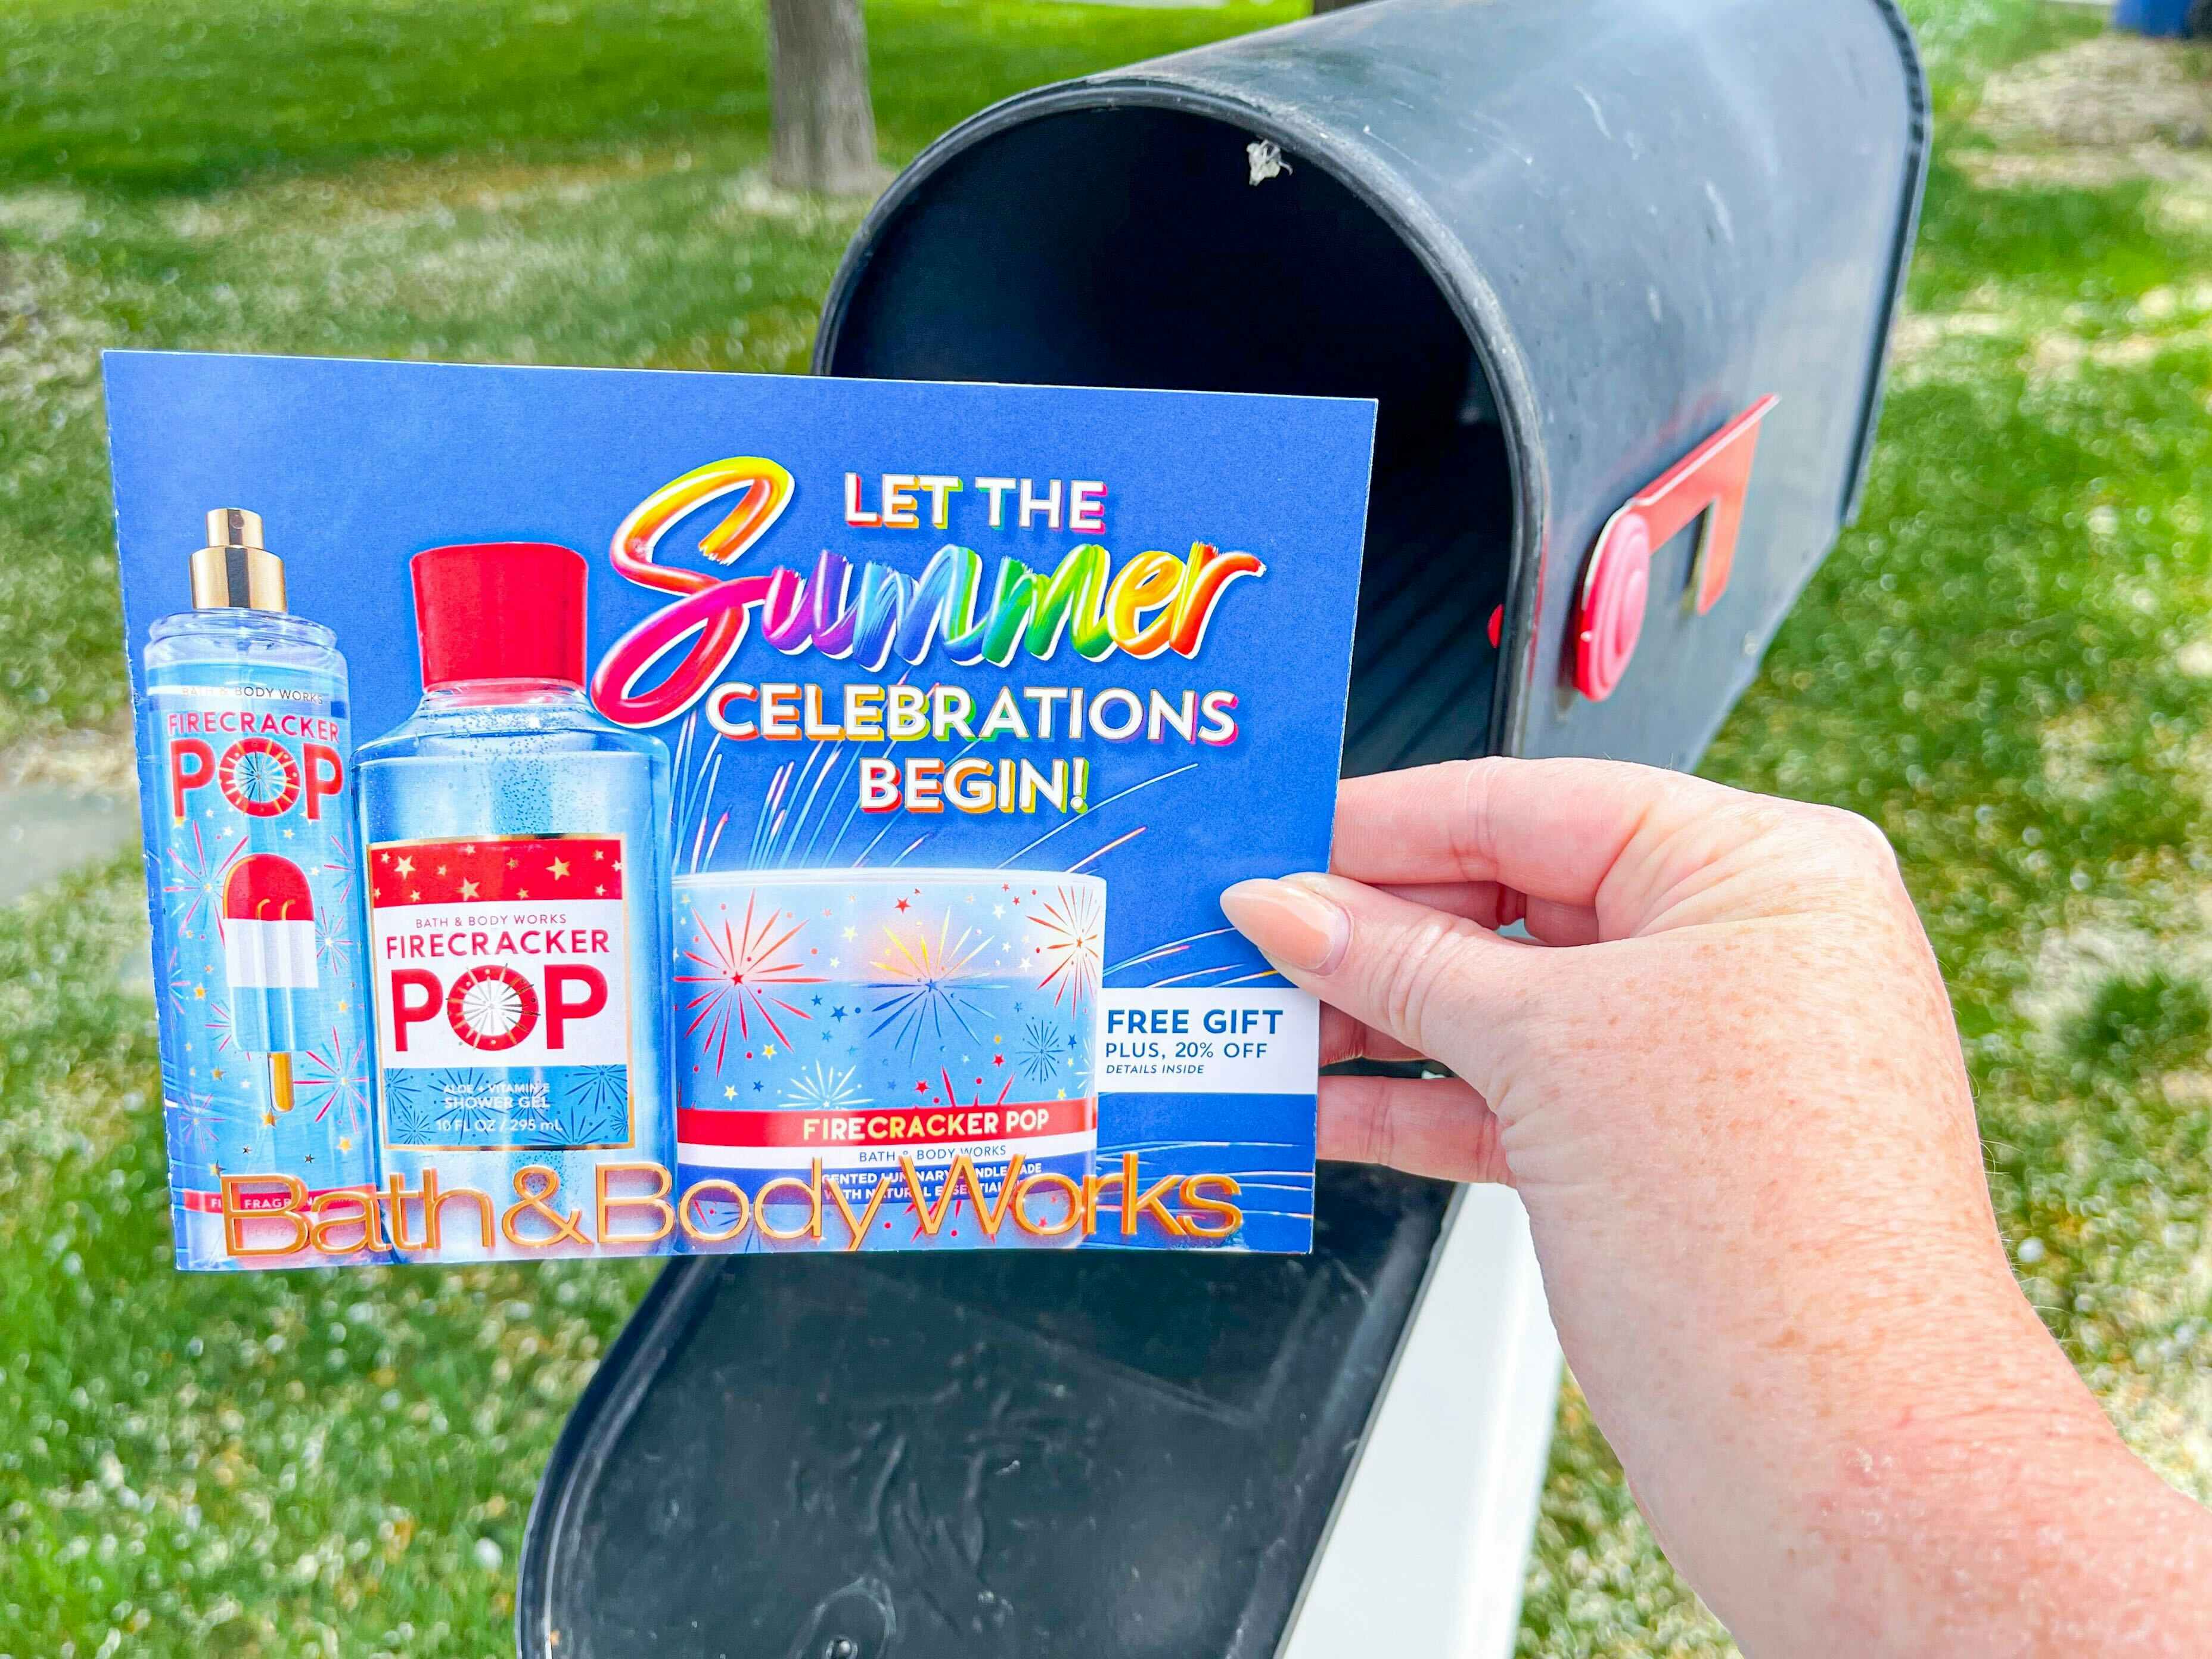 A person's hand taking a Bath & Body Works coupon mailer out of their mailbox.